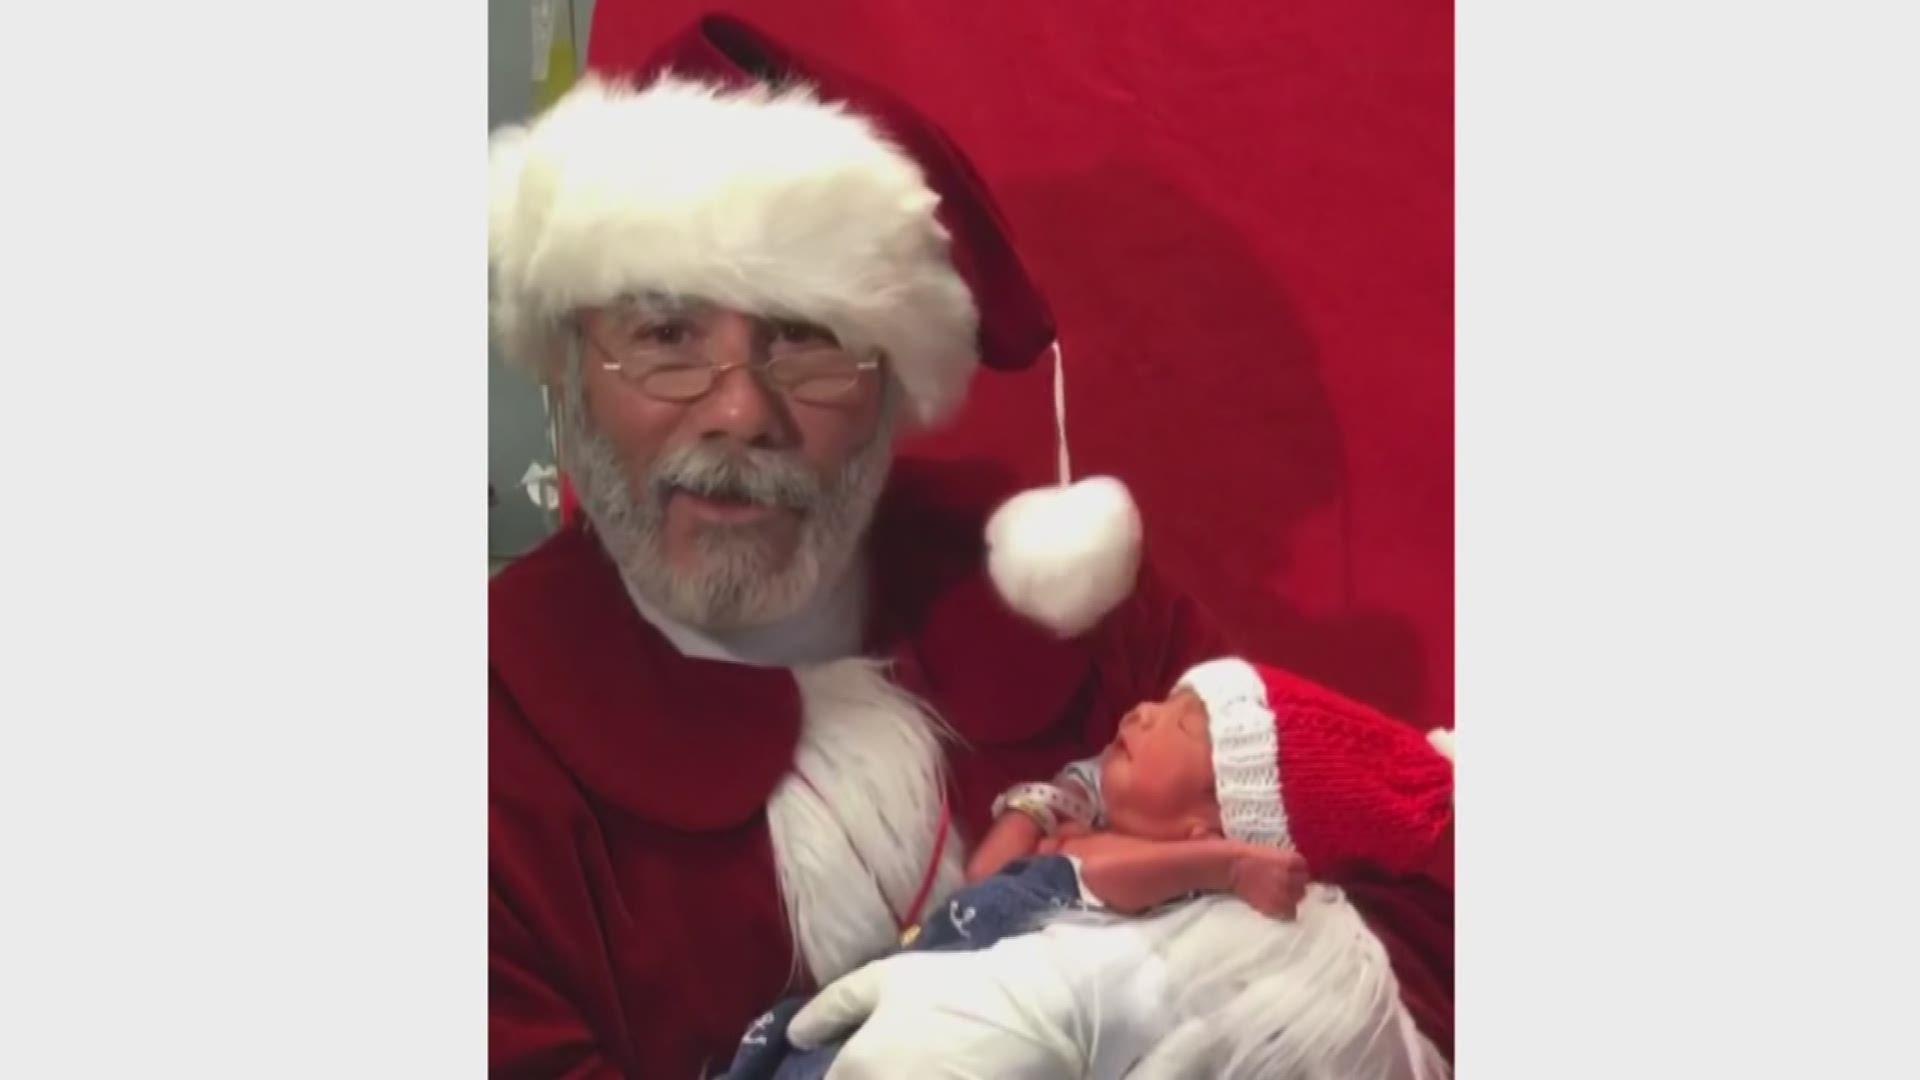 Santa made a special visit to his littlest fans today. Mister Claus brought cheer to families in the unit specializing in caring for ill or premature newborns.